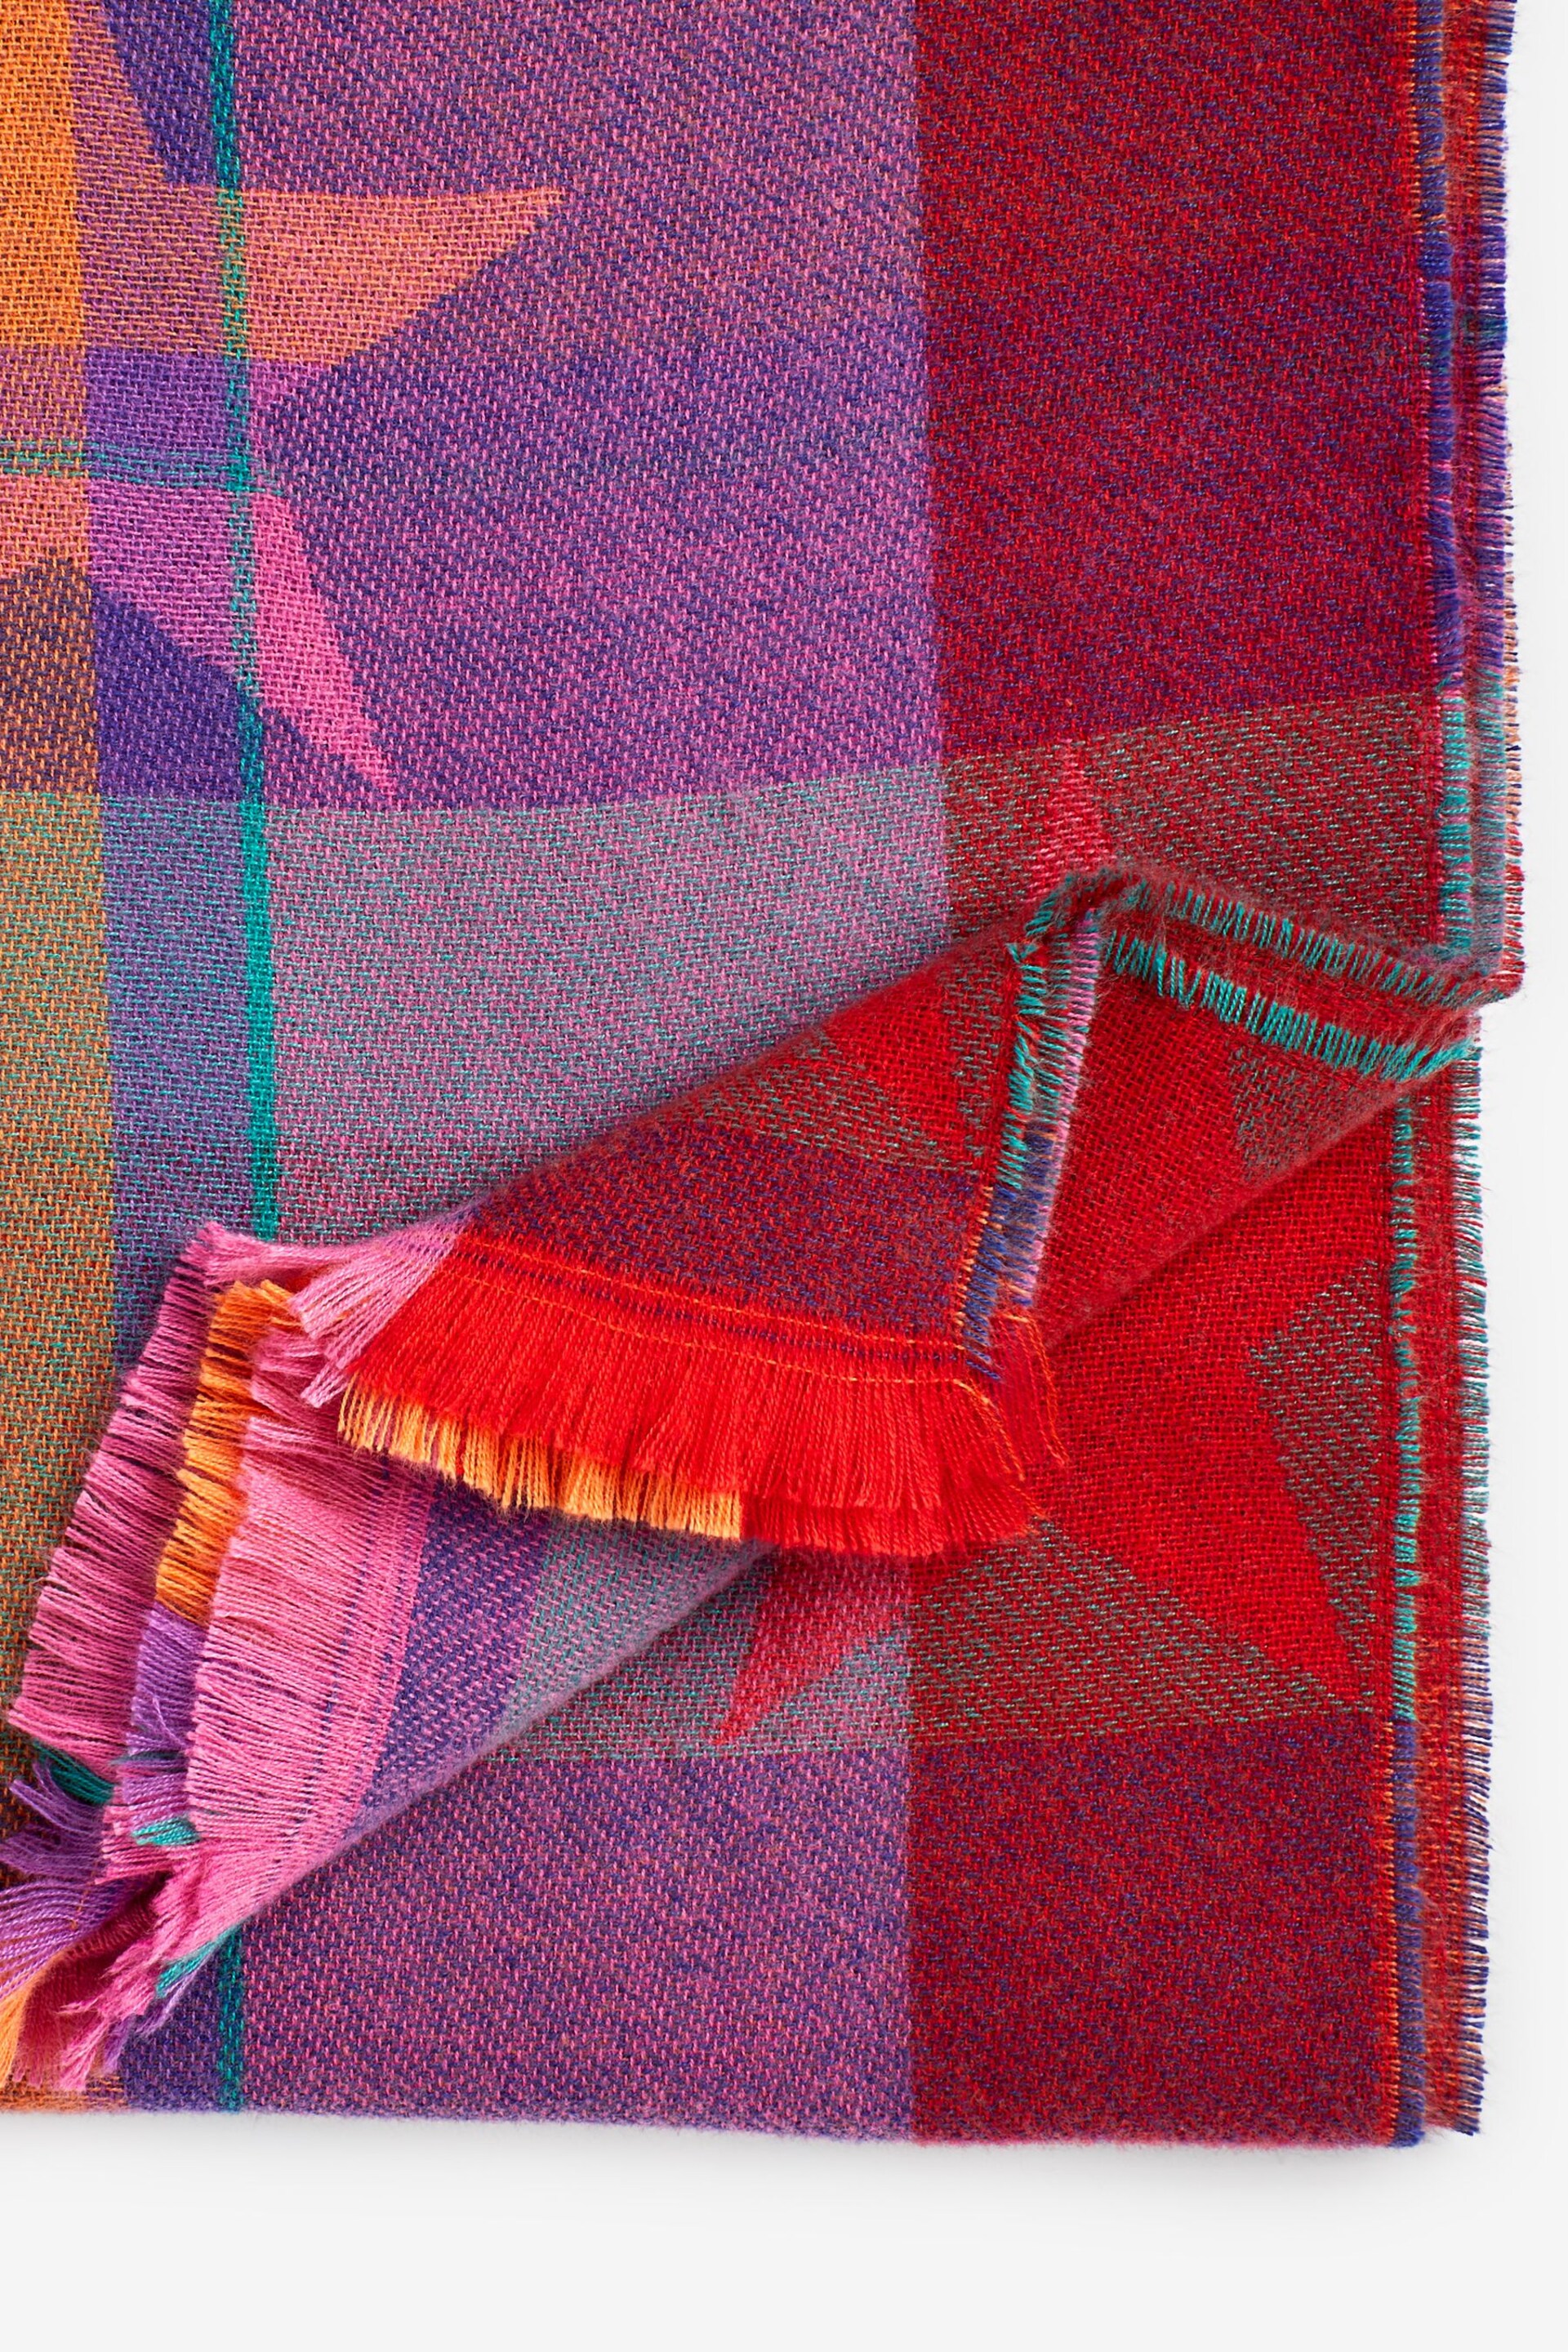 Bright Check Star Heavyweight Blanket Scarf - Image 6 of 6